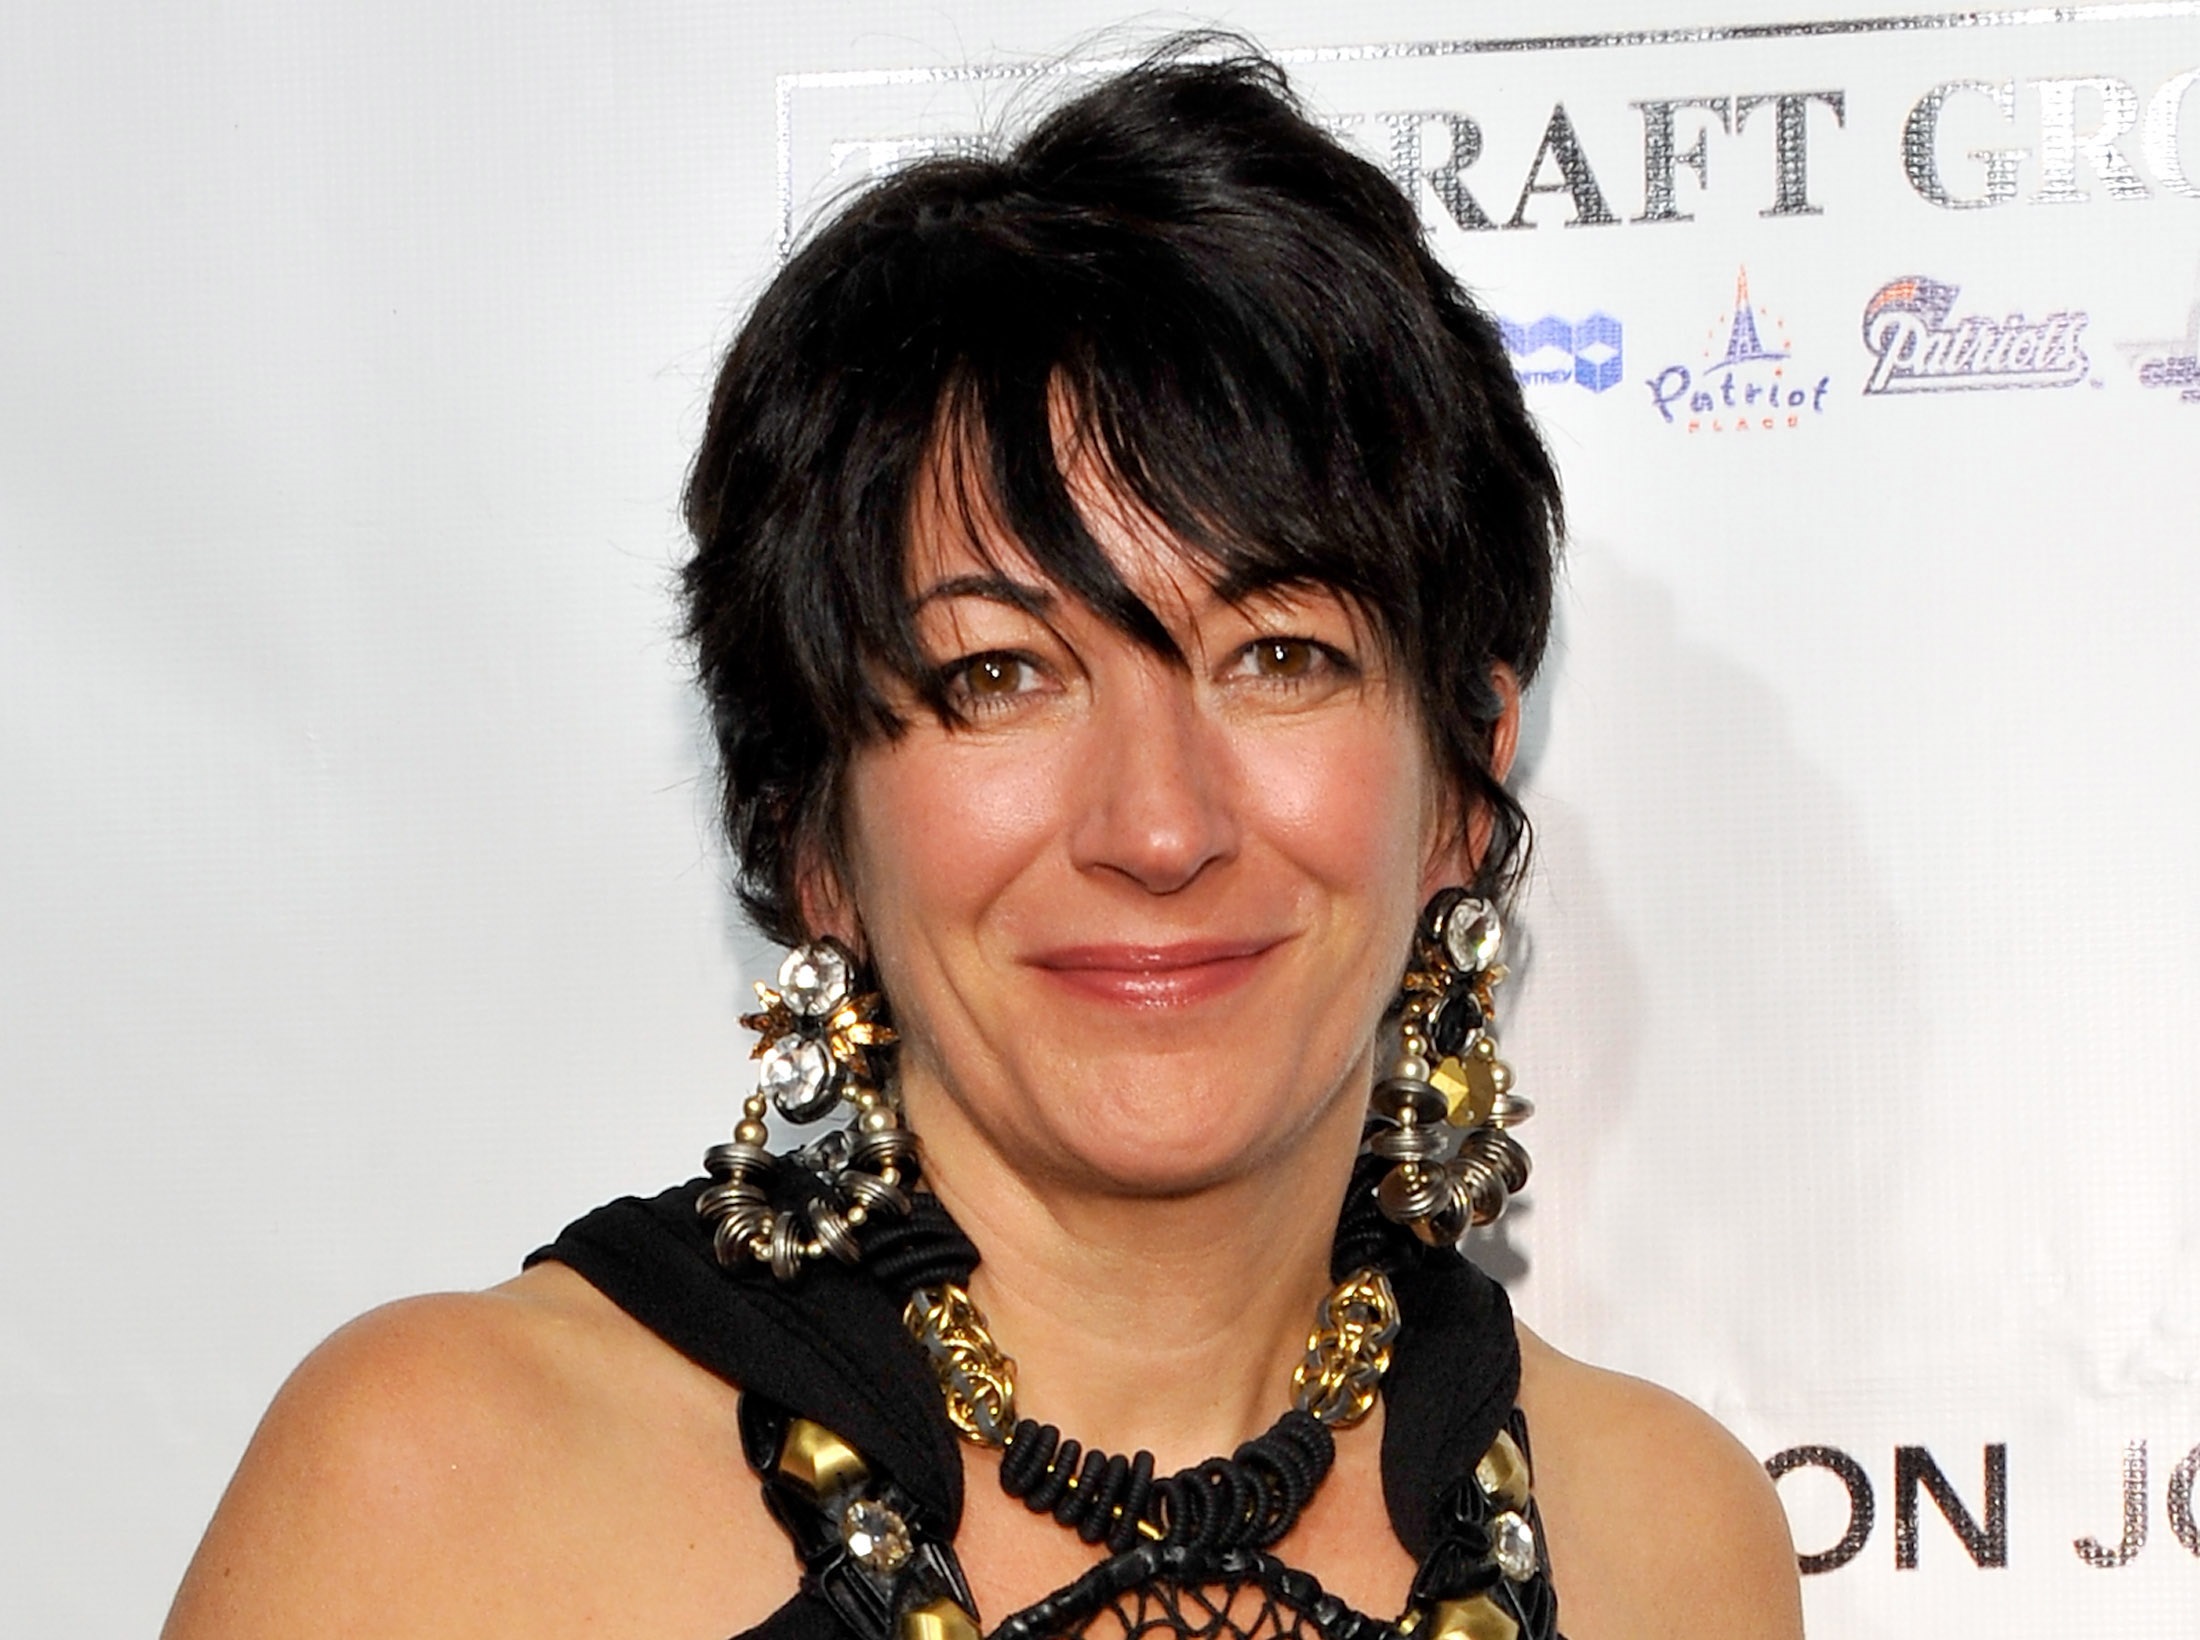 Ghislaine Maxwell fails to sway judge with claims of sleep deprivation.